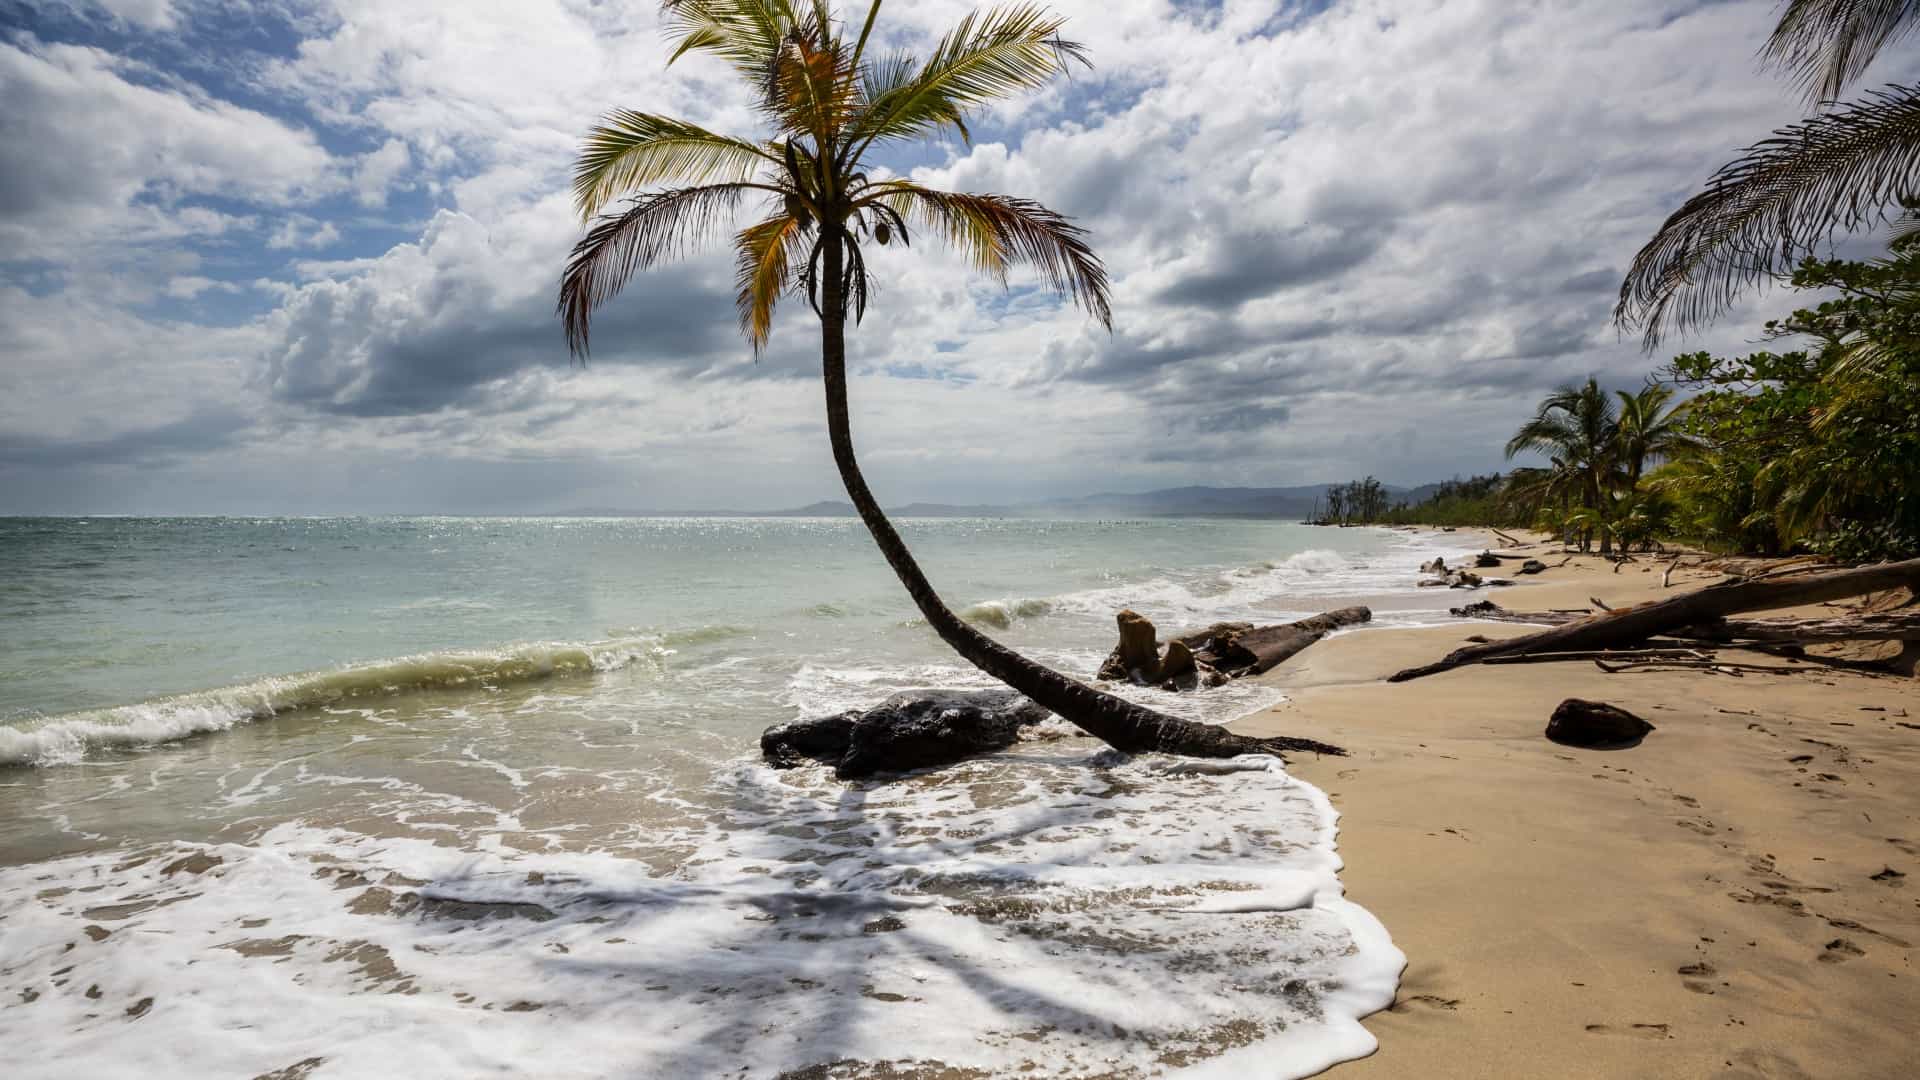 A solitary palm tree leans over a tranquil beach with gentle waves lapping the shore. The beach is lined with lush tropical foliage and scattered driftwood.